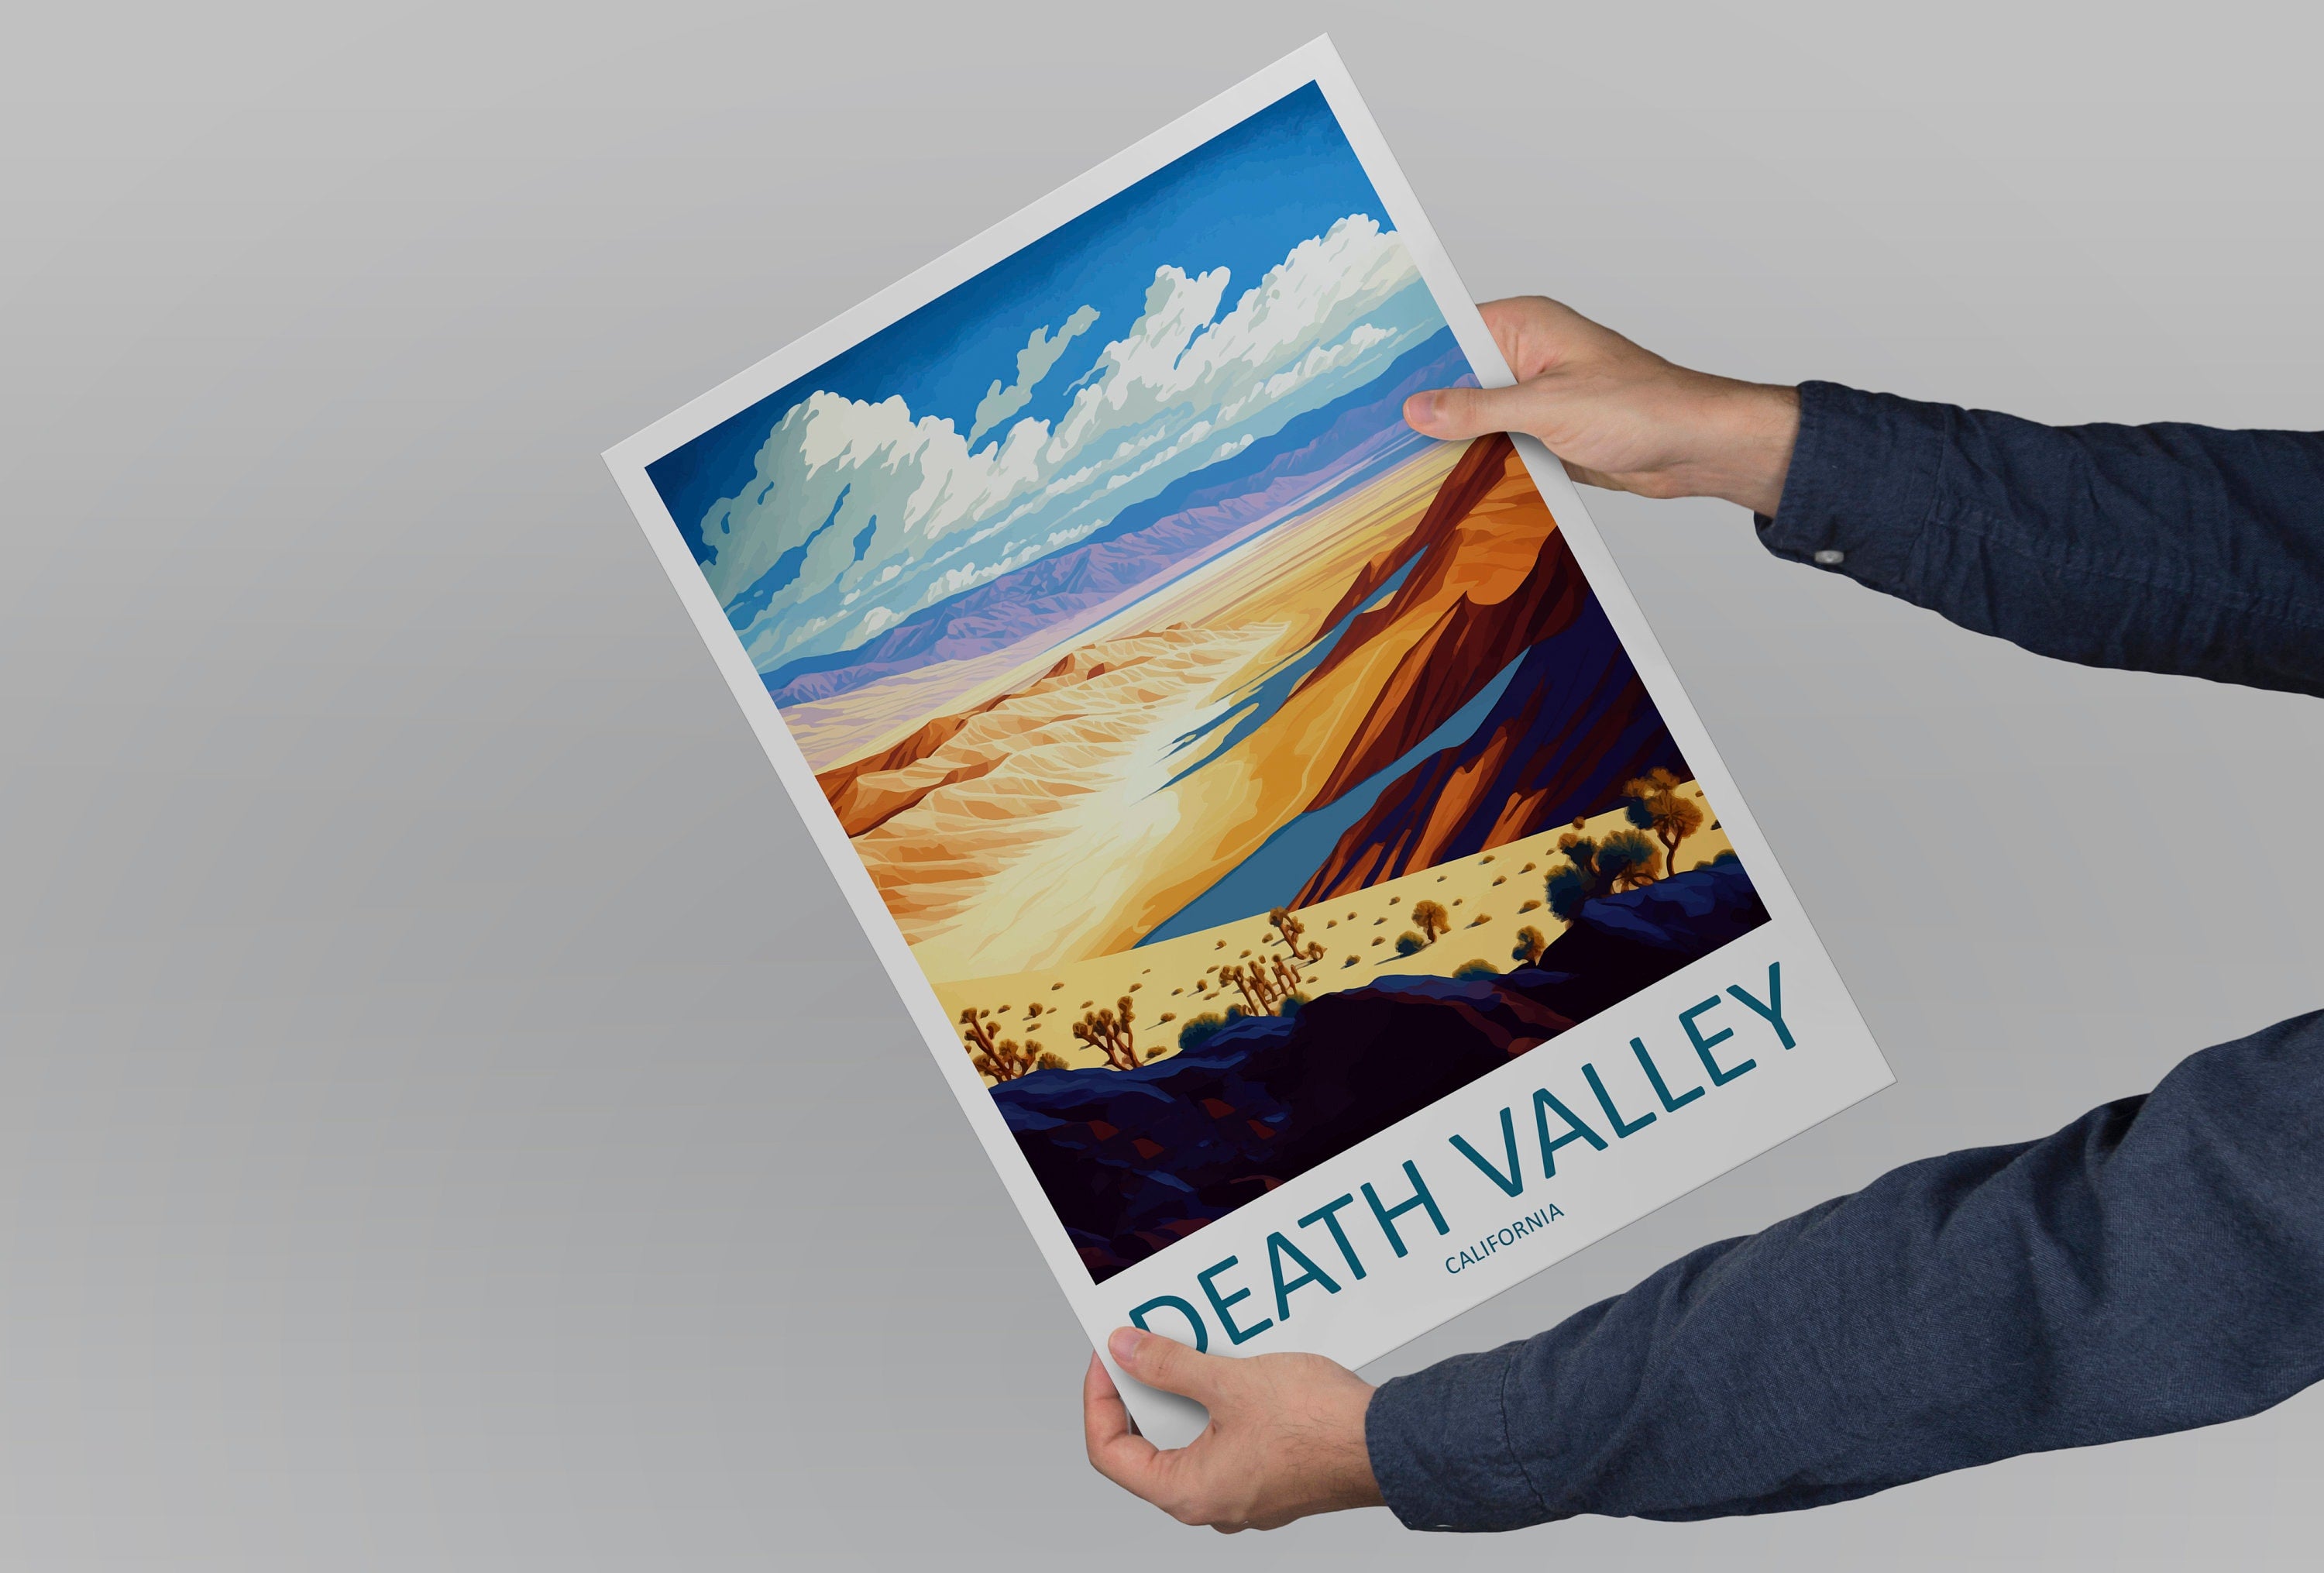 Death Valley National Park Travel Print Wall Art Death Valley Wall Hanging Home Décor Death Valley Gift Art Lovers California Art Lover Gift